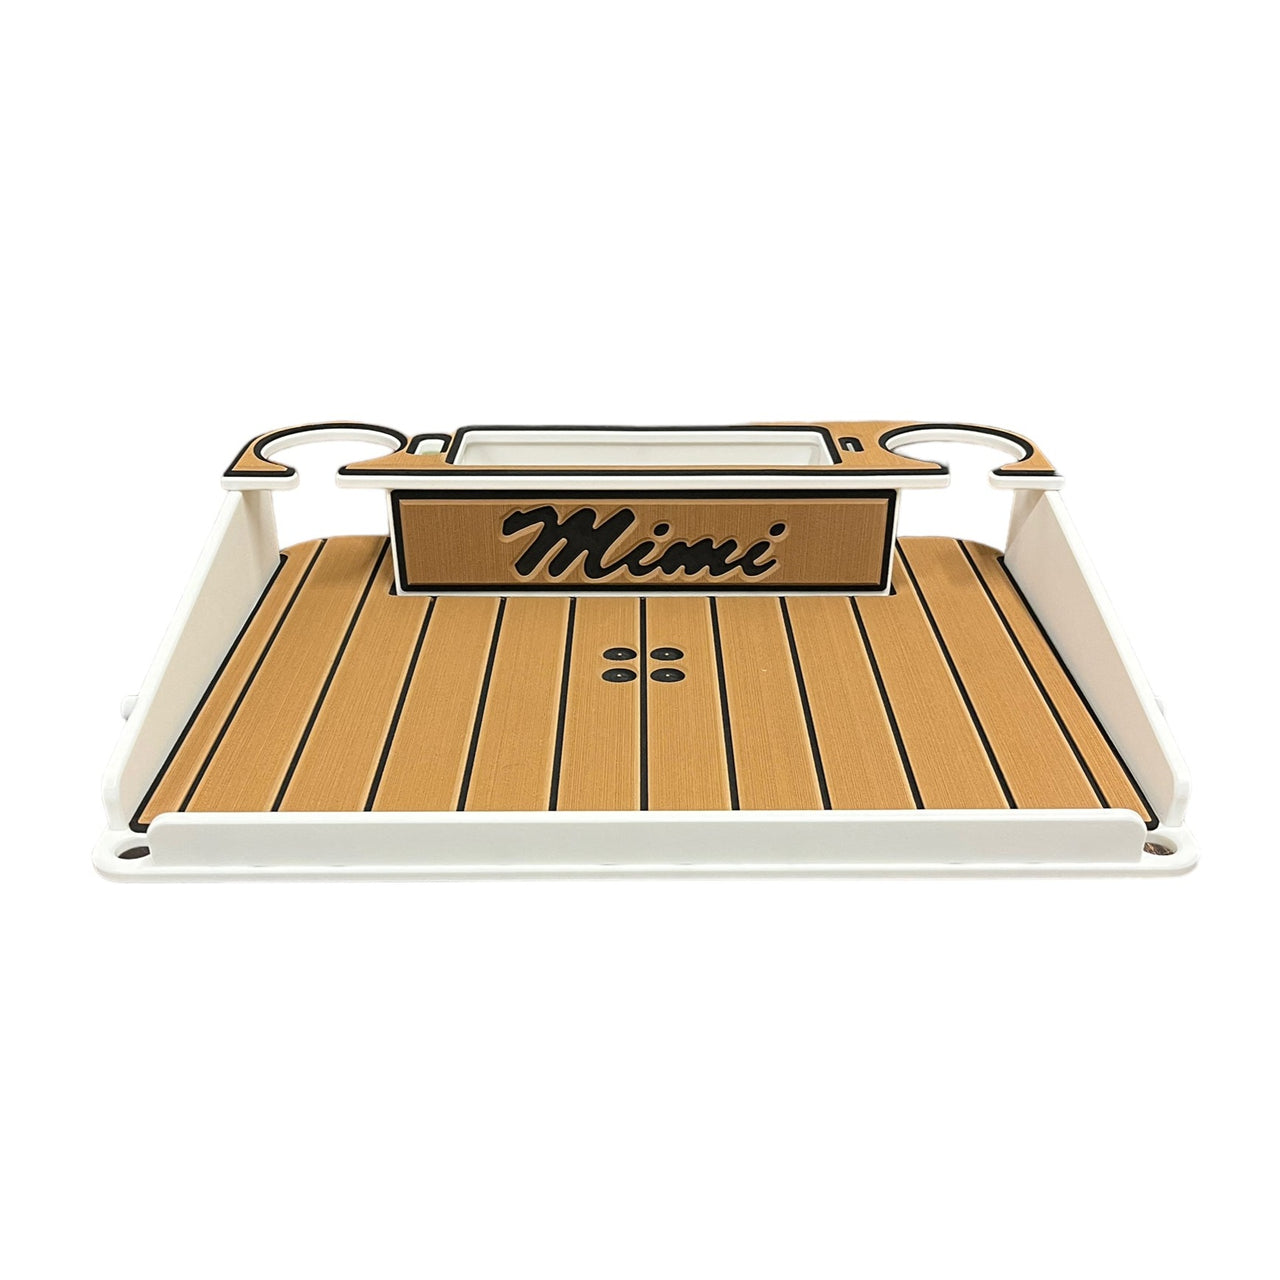 Custom Boat Names - Add Your Boat Name to Decking Kits - Choose Font & Letter Style